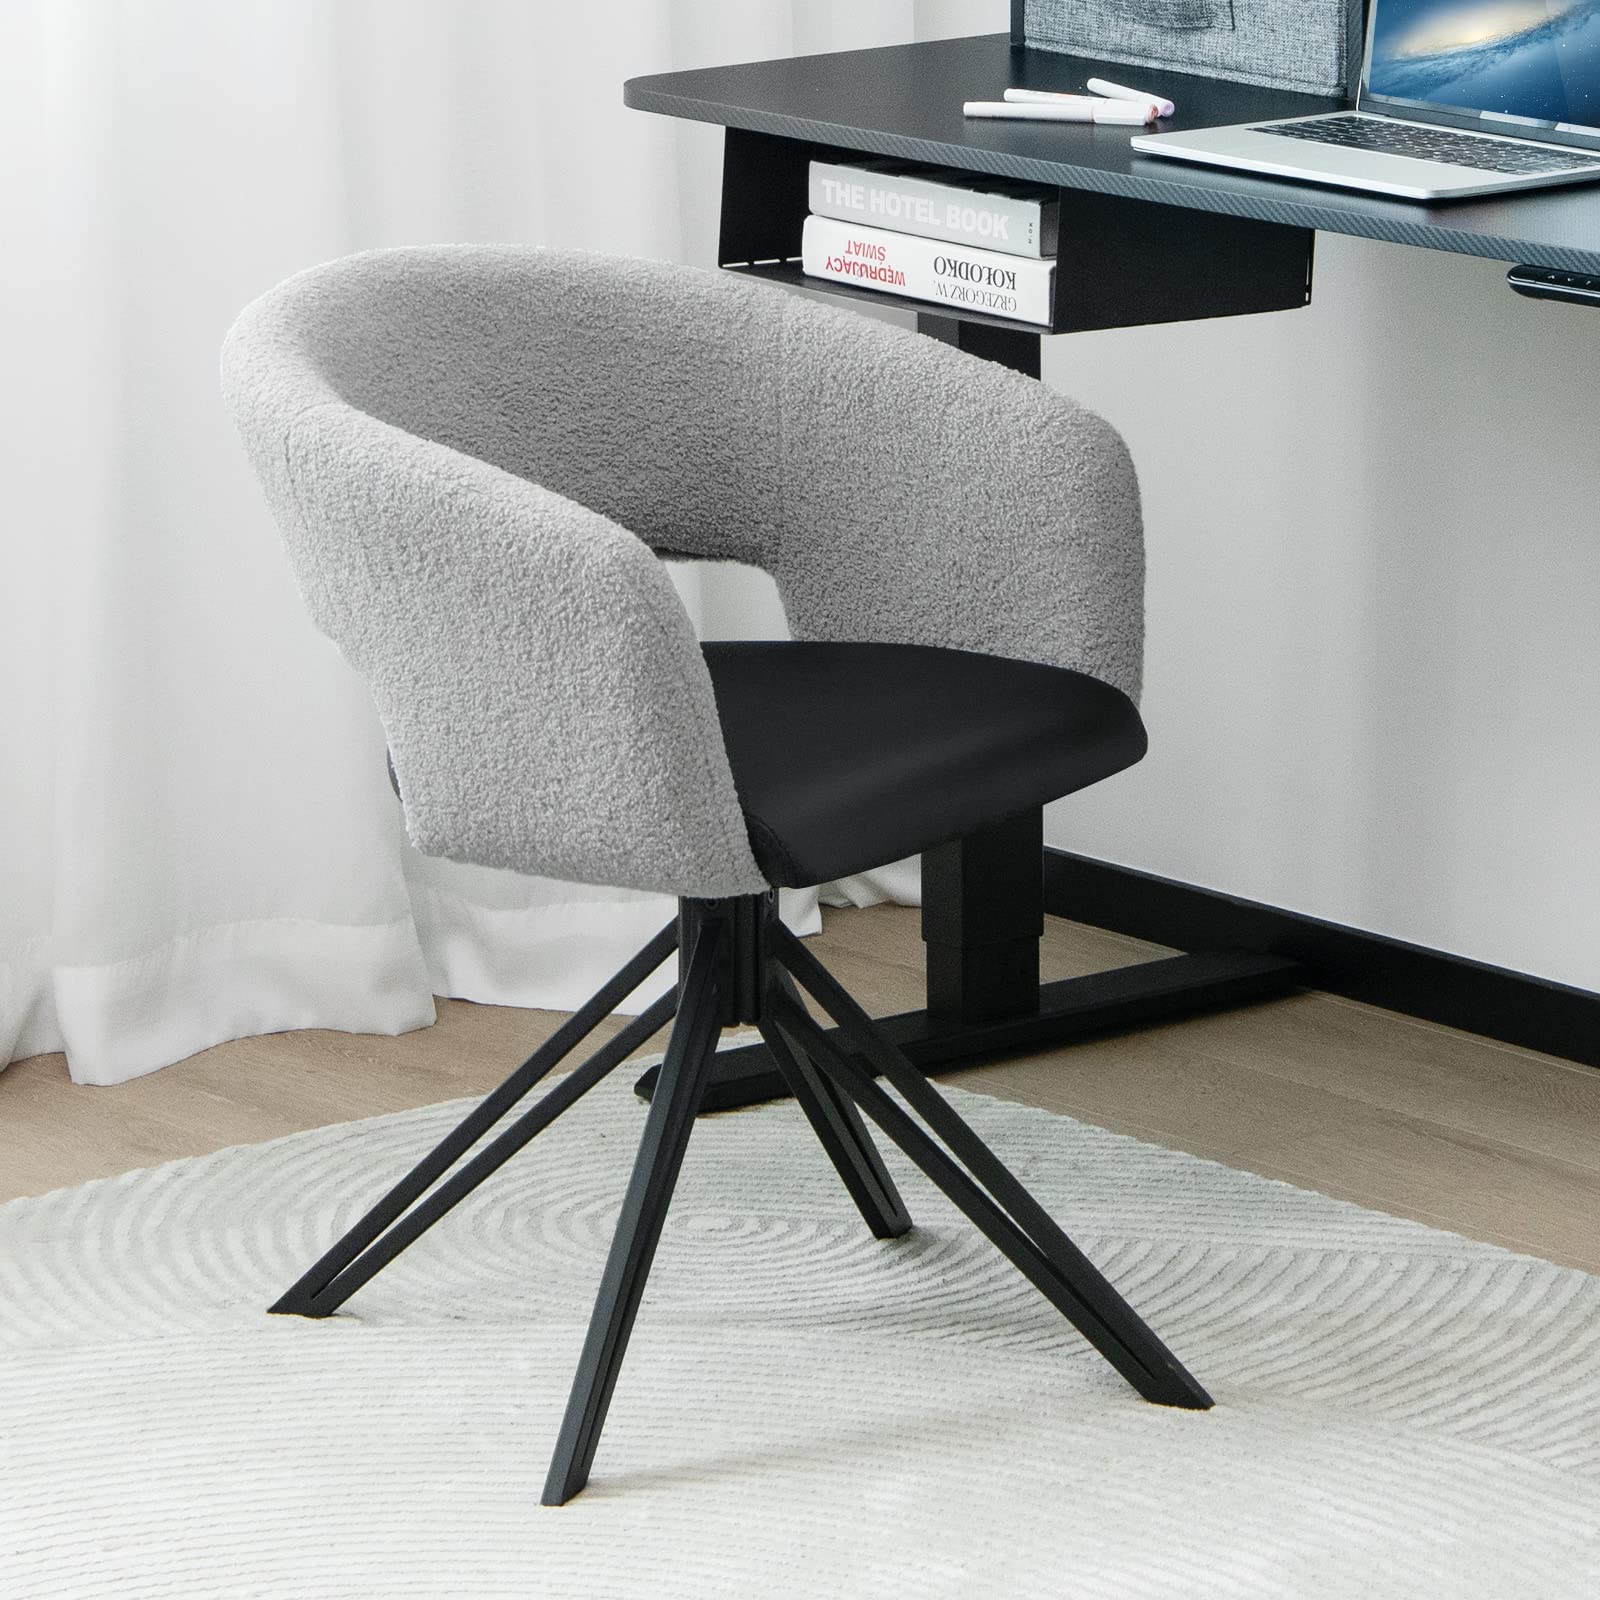 Giantex Modern Swivel Accent Chair, Sherpa Covered Desk Chair No Wheels with Solid Steel Legs